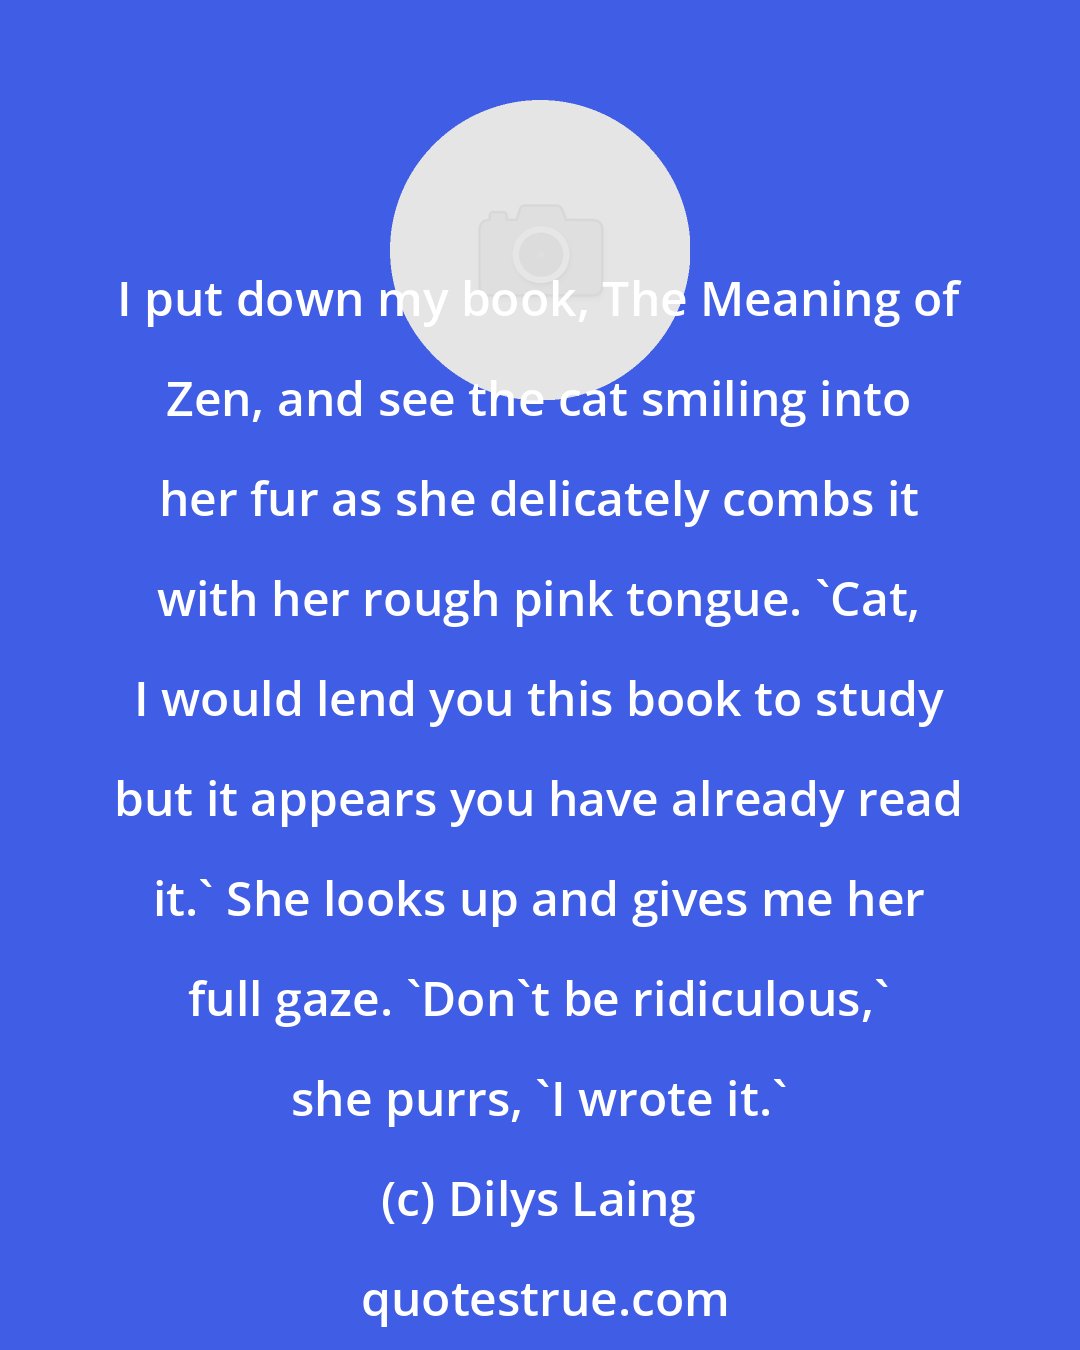 Dilys Laing: I put down my book, The Meaning of Zen, and see the cat smiling into her fur as she delicately combs it with her rough pink tongue. 'Cat, I would lend you this book to study but it appears you have already read it.' She looks up and gives me her full gaze. 'Don't be ridiculous,' she purrs, 'I wrote it.'